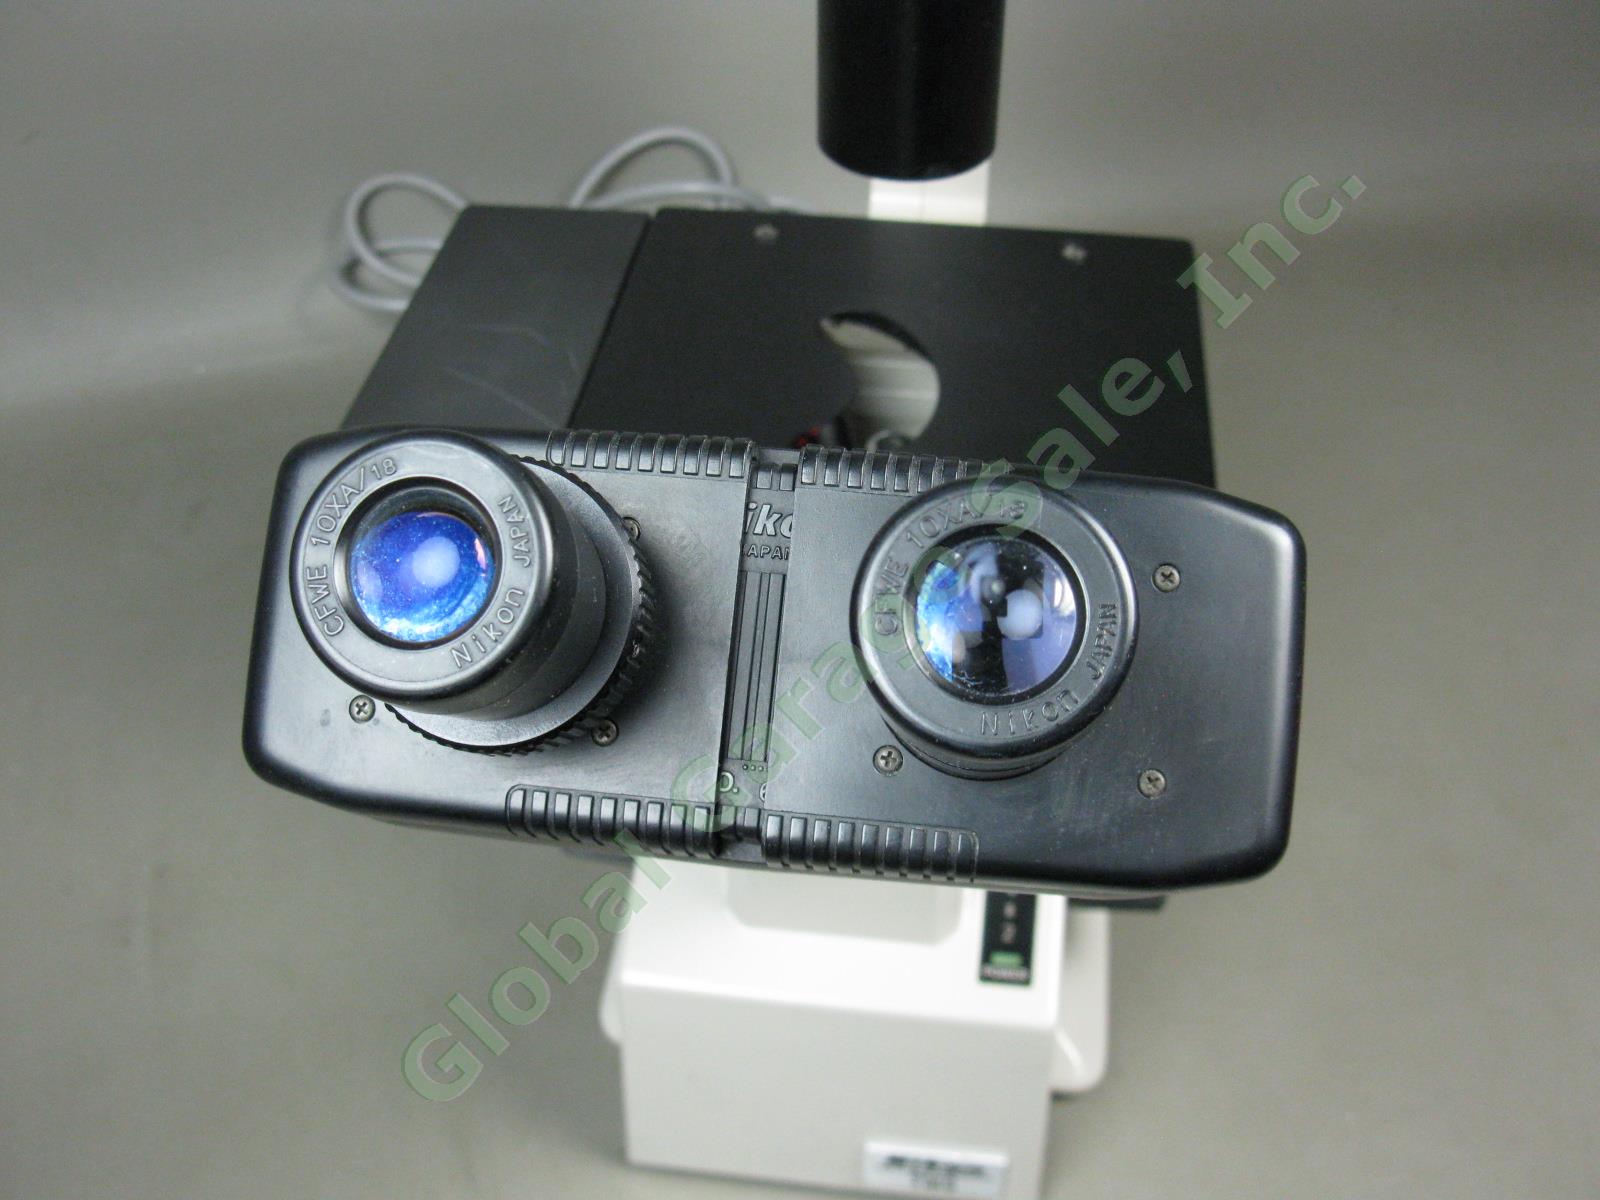 Nikon TMS Inverted Phase Contrast Microscope W/ 4 Objectives DLL 10 Ph 1-2 DL 20 2